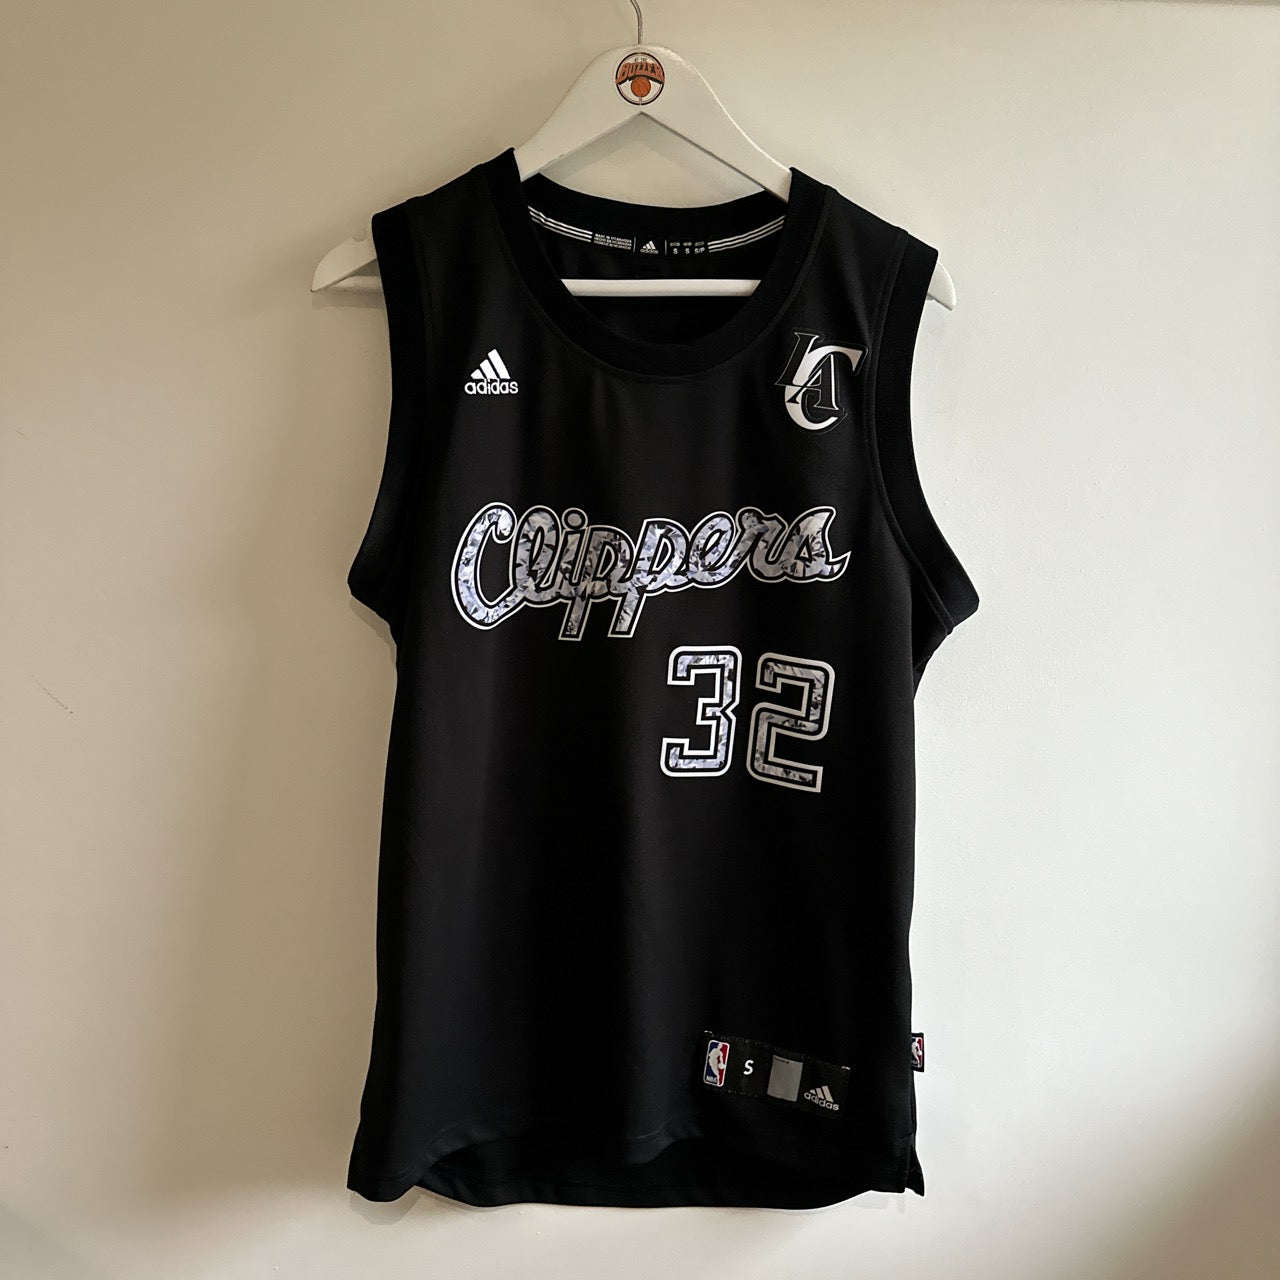 Los Angeles Clippers Blake Griffin Adidas jersey - Small (Fits medium)